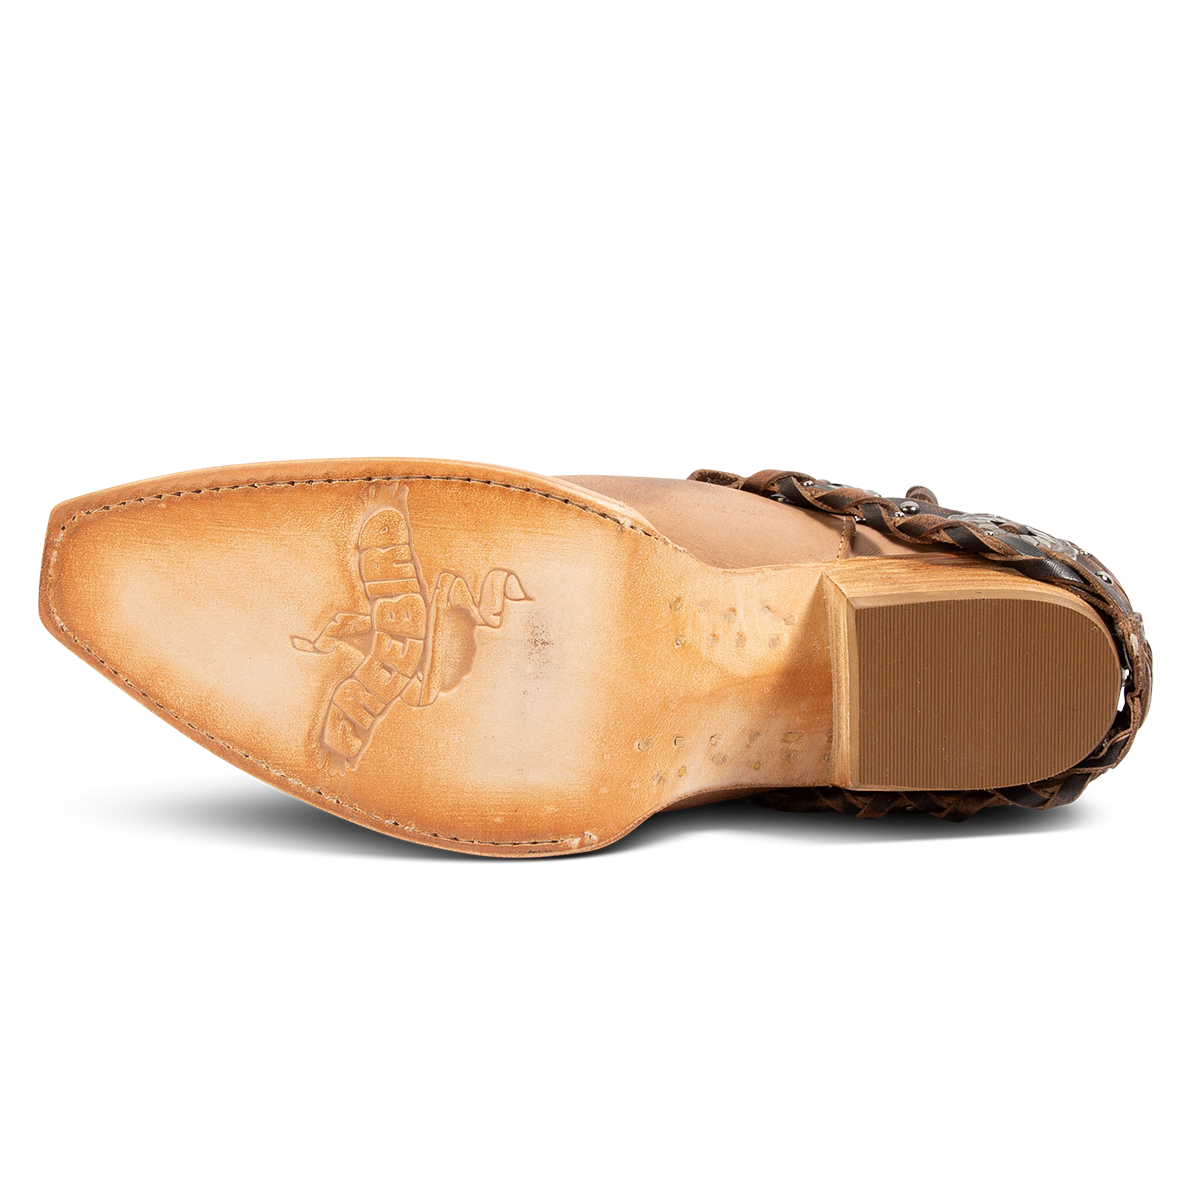 Leather sole imprinted with FREEBIRD